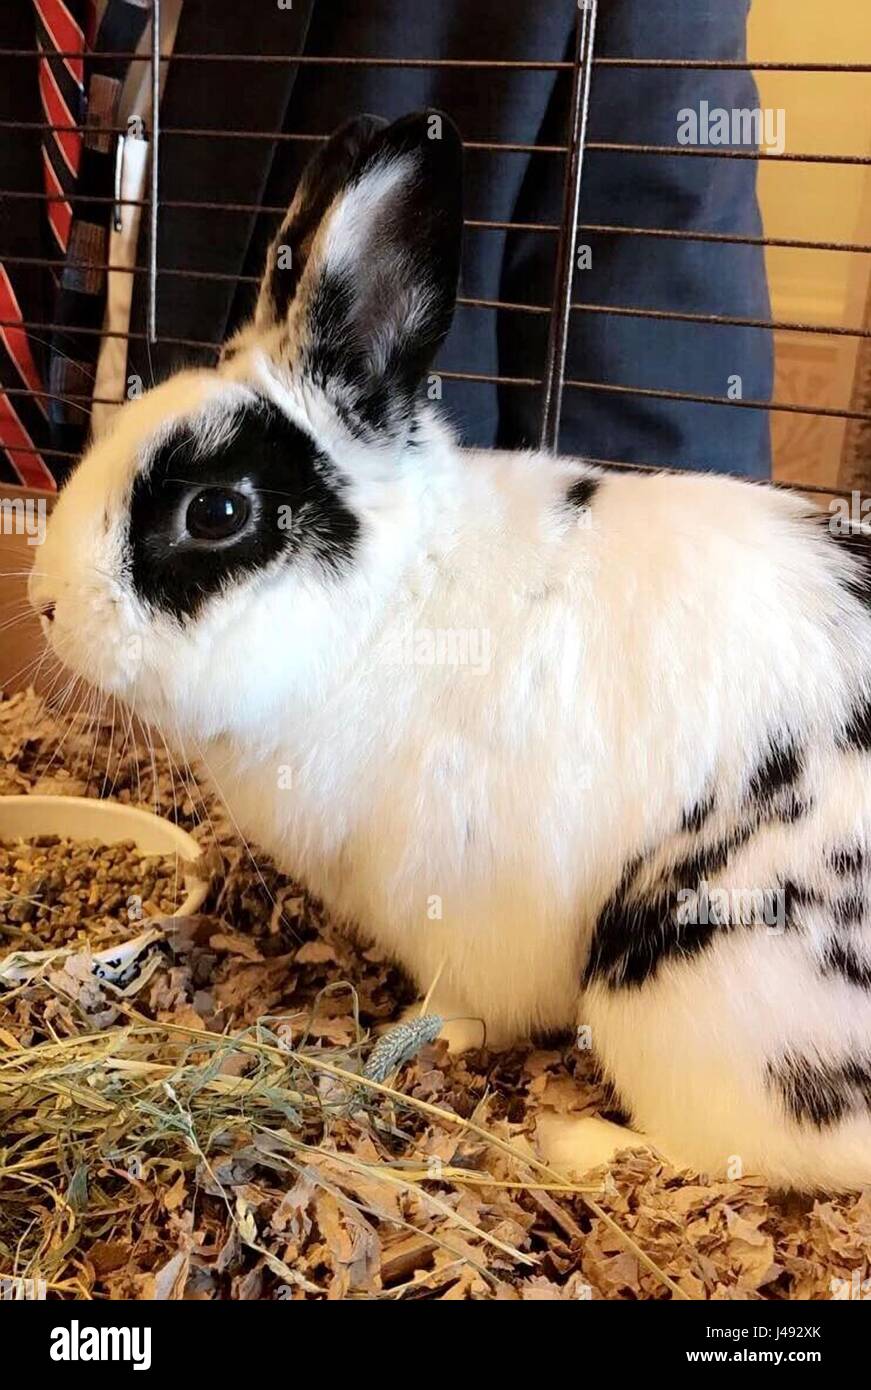 Washington DC, USA. 10th May, 2017. The official Photo of the Day handout showing the Second Family pet rabbit, Marlon Bundo, also known as BOTUS released the White House press office while U.S. President Donald Trump was meeting with Russian Foreign Minister Sergey Lavrov in the Oval Office of the White House May 10, 2017 in Washington, DC. Trump refused entry to the White House media and only Russian media was allow to cover the event. Credit: Planetpix/Alamy Live News Stock Photo